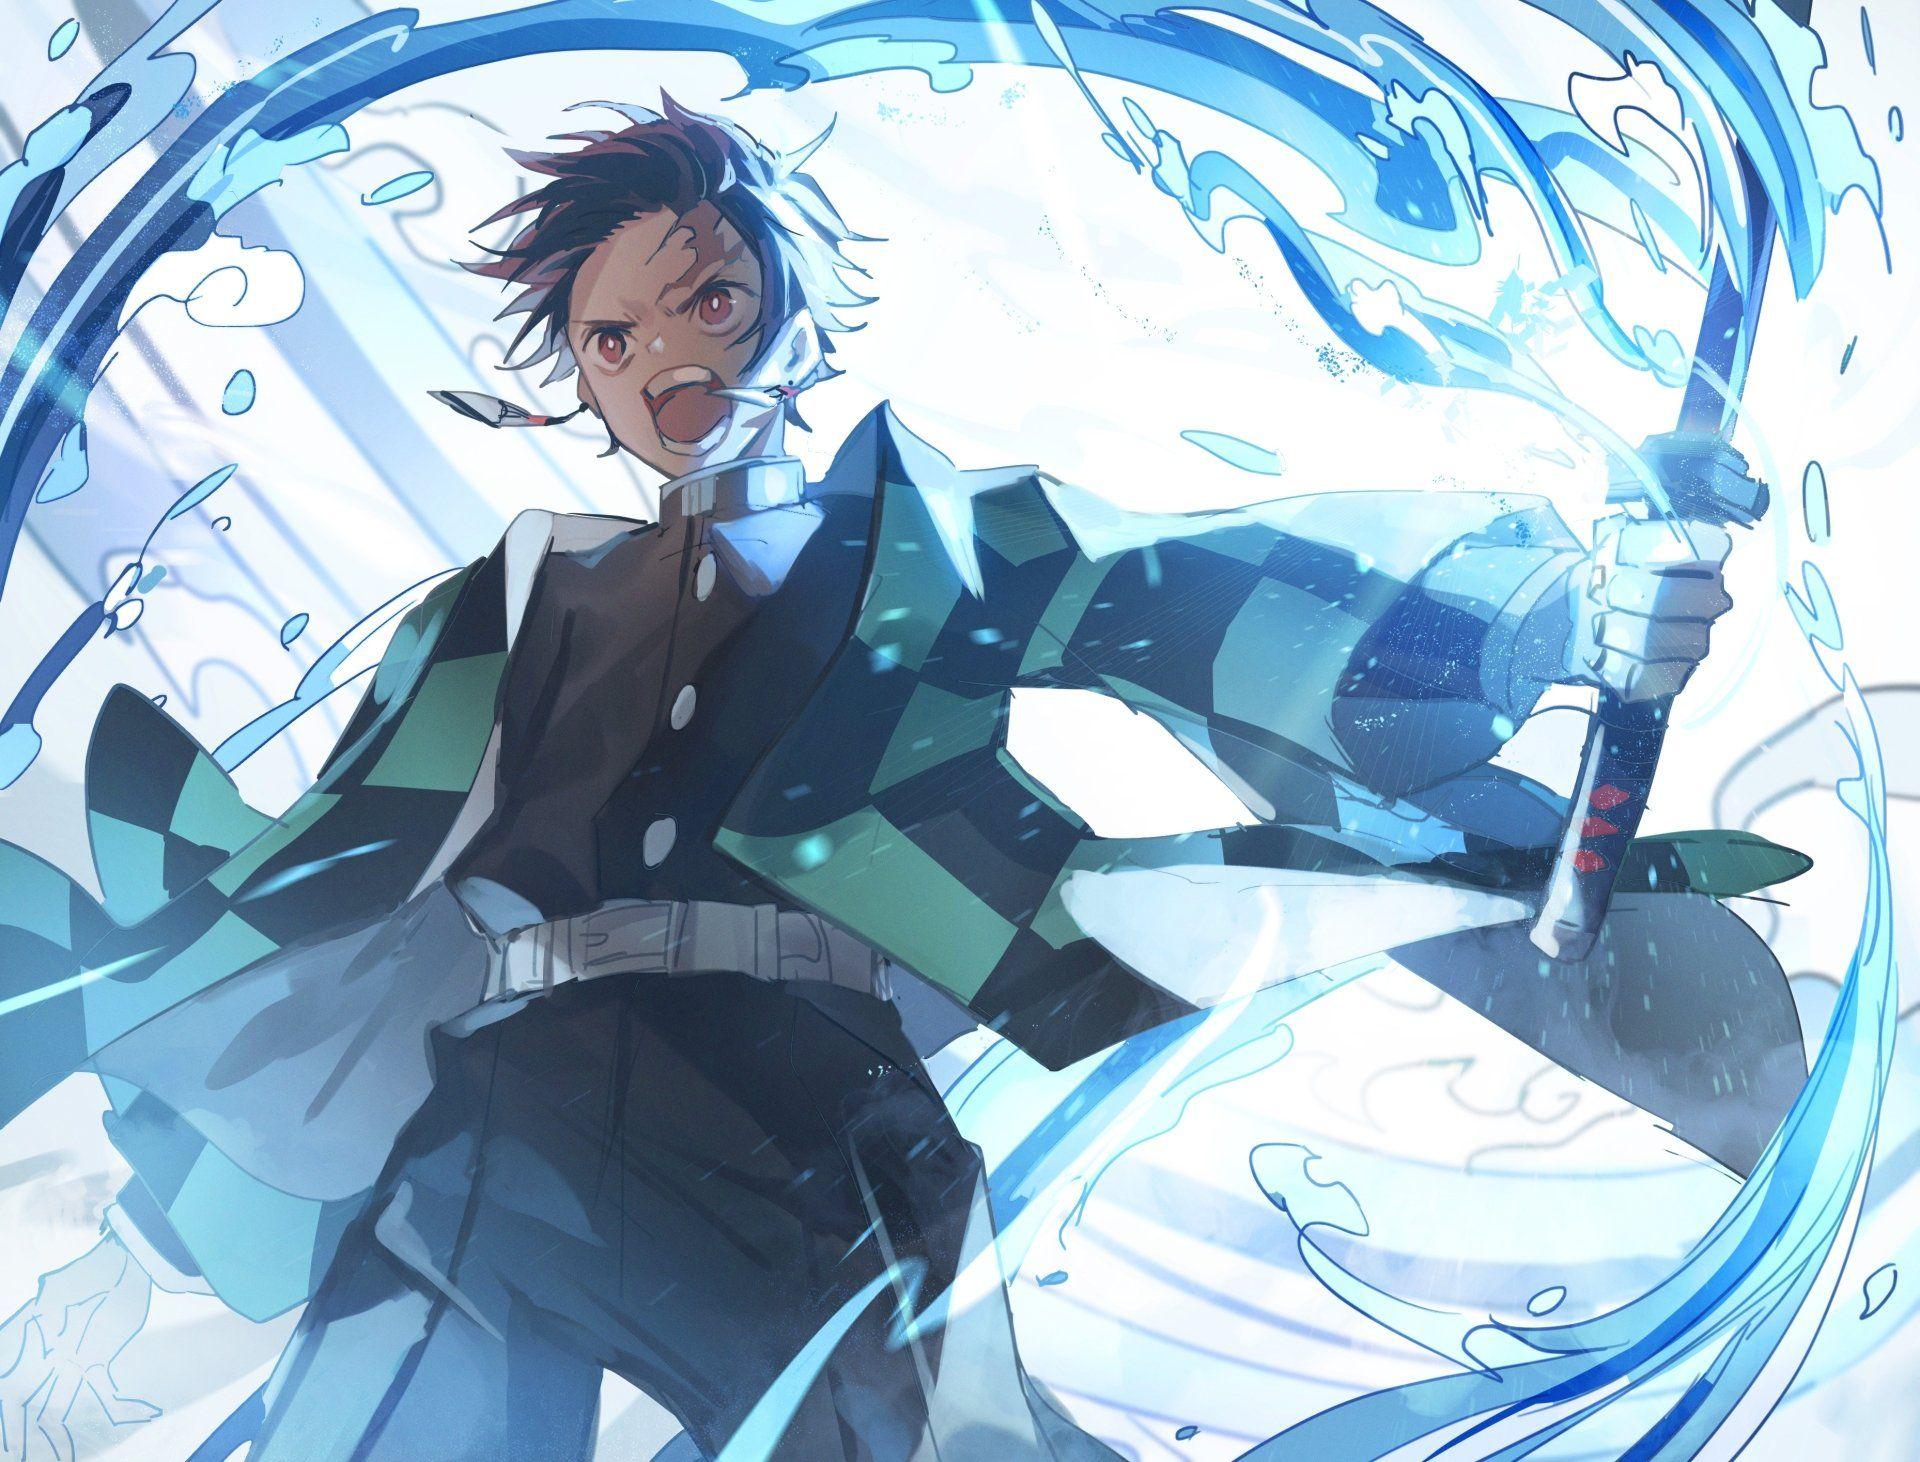 A character from the anime Demon Slayer, standing in a blue spiral of water with a sword in his hand - Demon Slayer